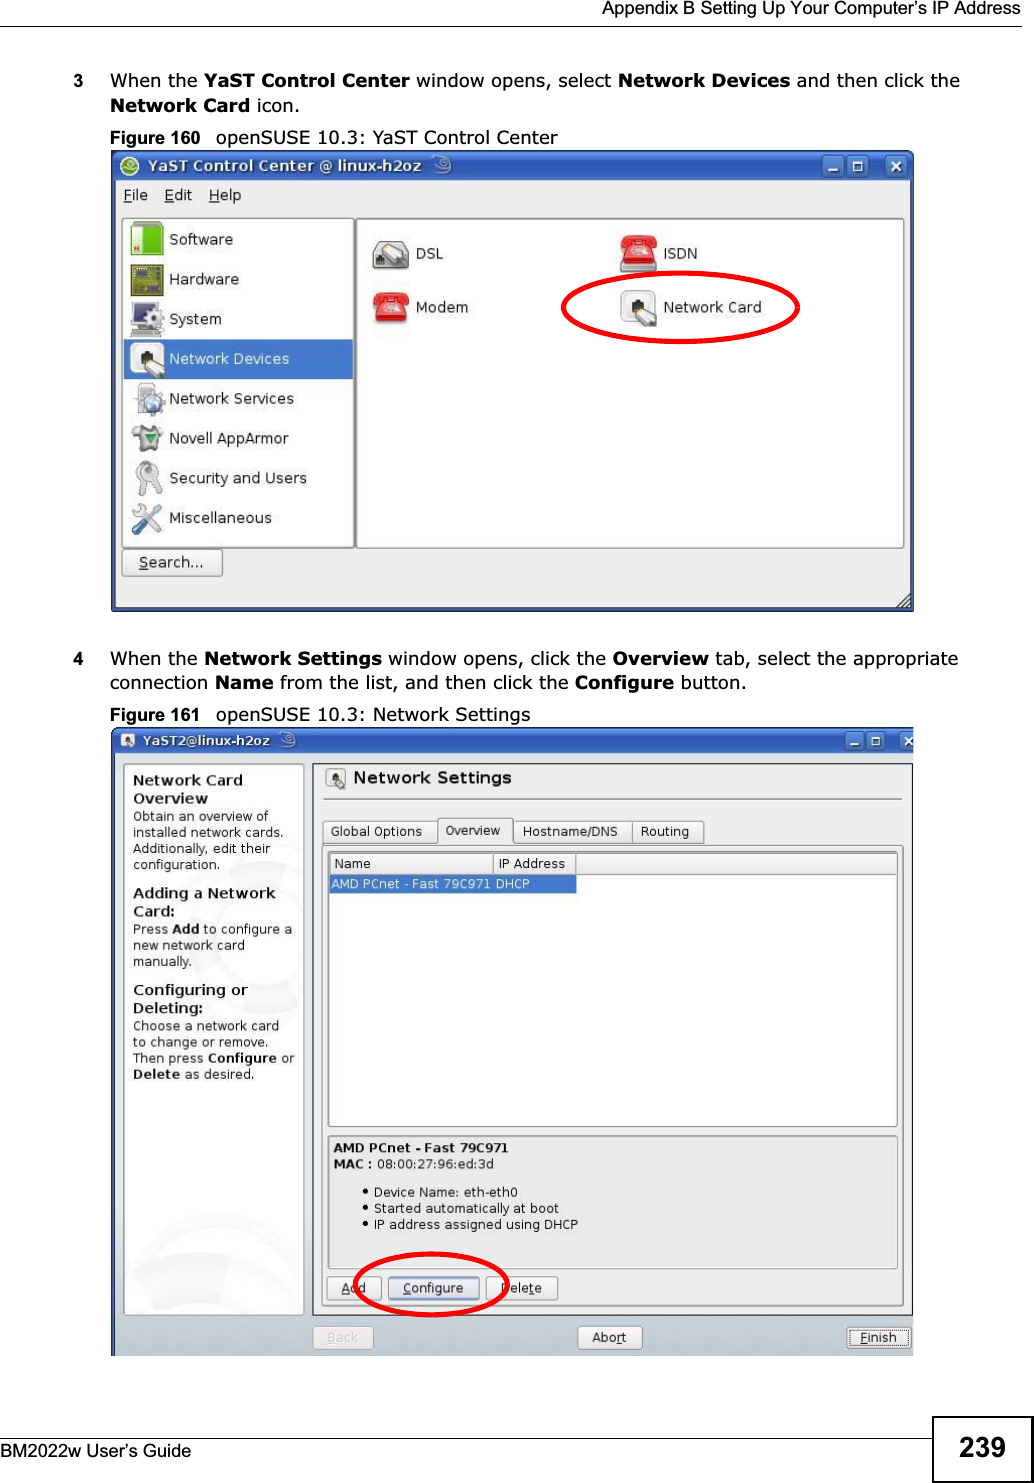  Appendix B Setting Up Your Computer’s IP AddressBM2022w User’s Guide 2393When the YaST Control Center window opens, select Network Devices and then click the Network Card icon.Figure 160   openSUSE 10.3: YaST Control Center4When the Network Settings window opens, click the Overview tab, select the appropriate connection Name from the list, and then click the Configure button. Figure 161   openSUSE 10.3: Network Settings